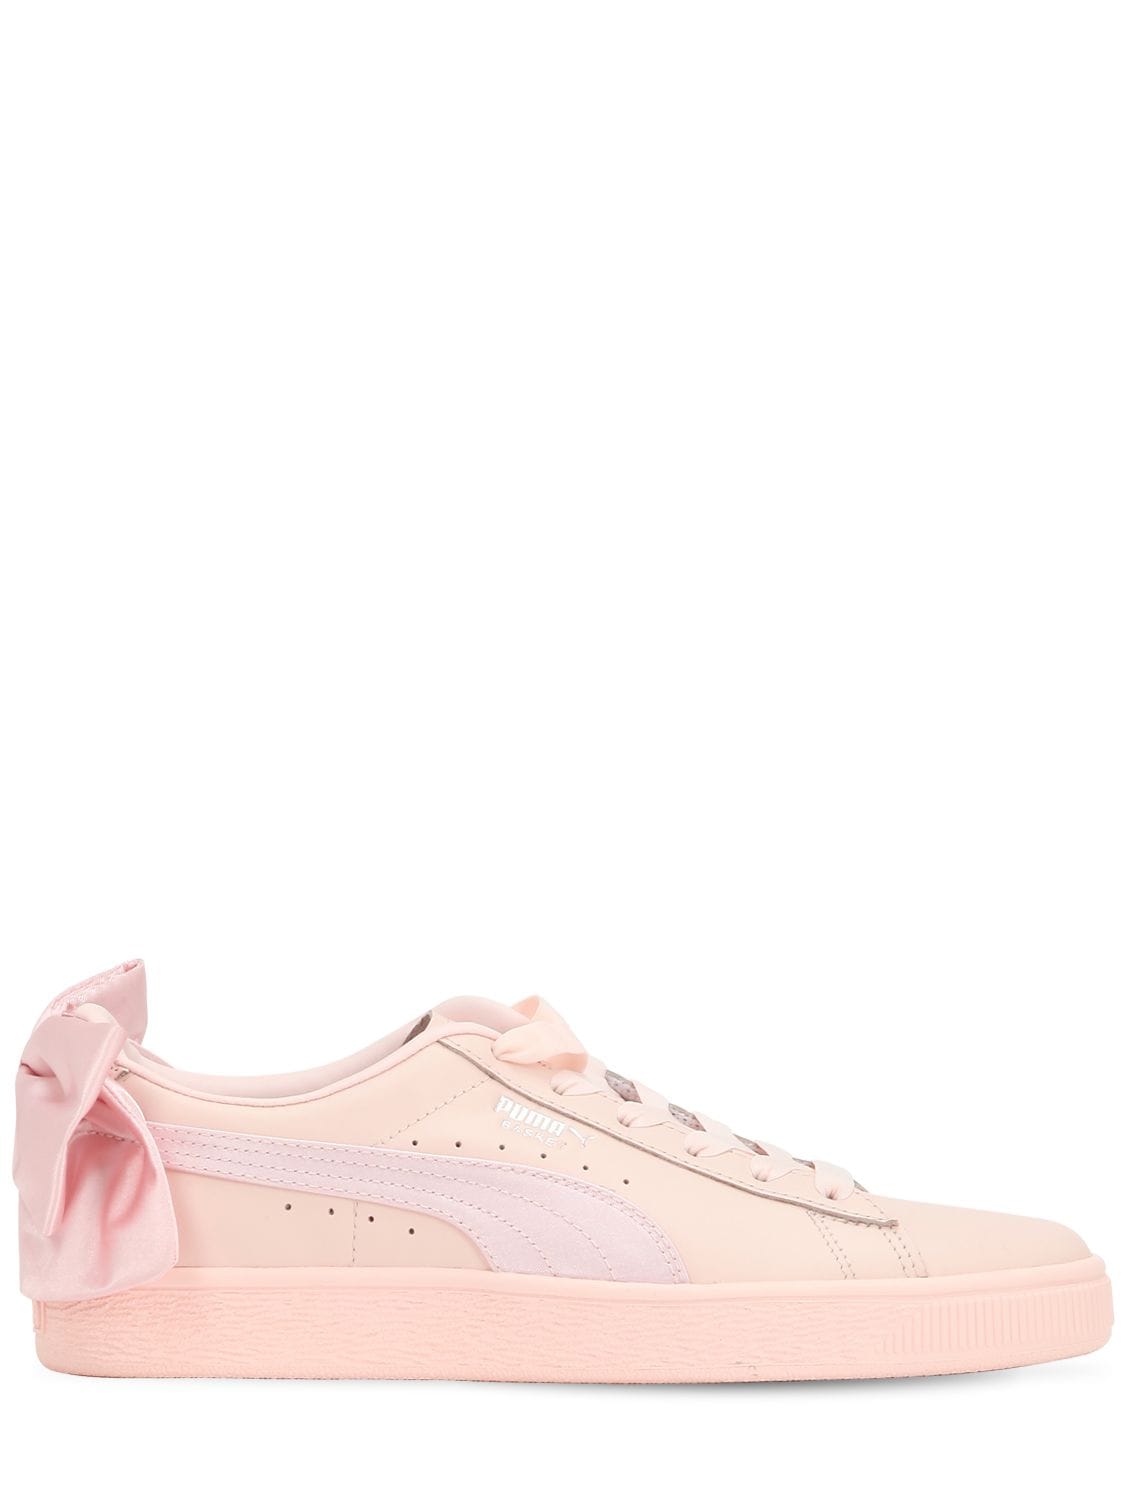 Puma Basket Bow Leather Sneakers In Pink